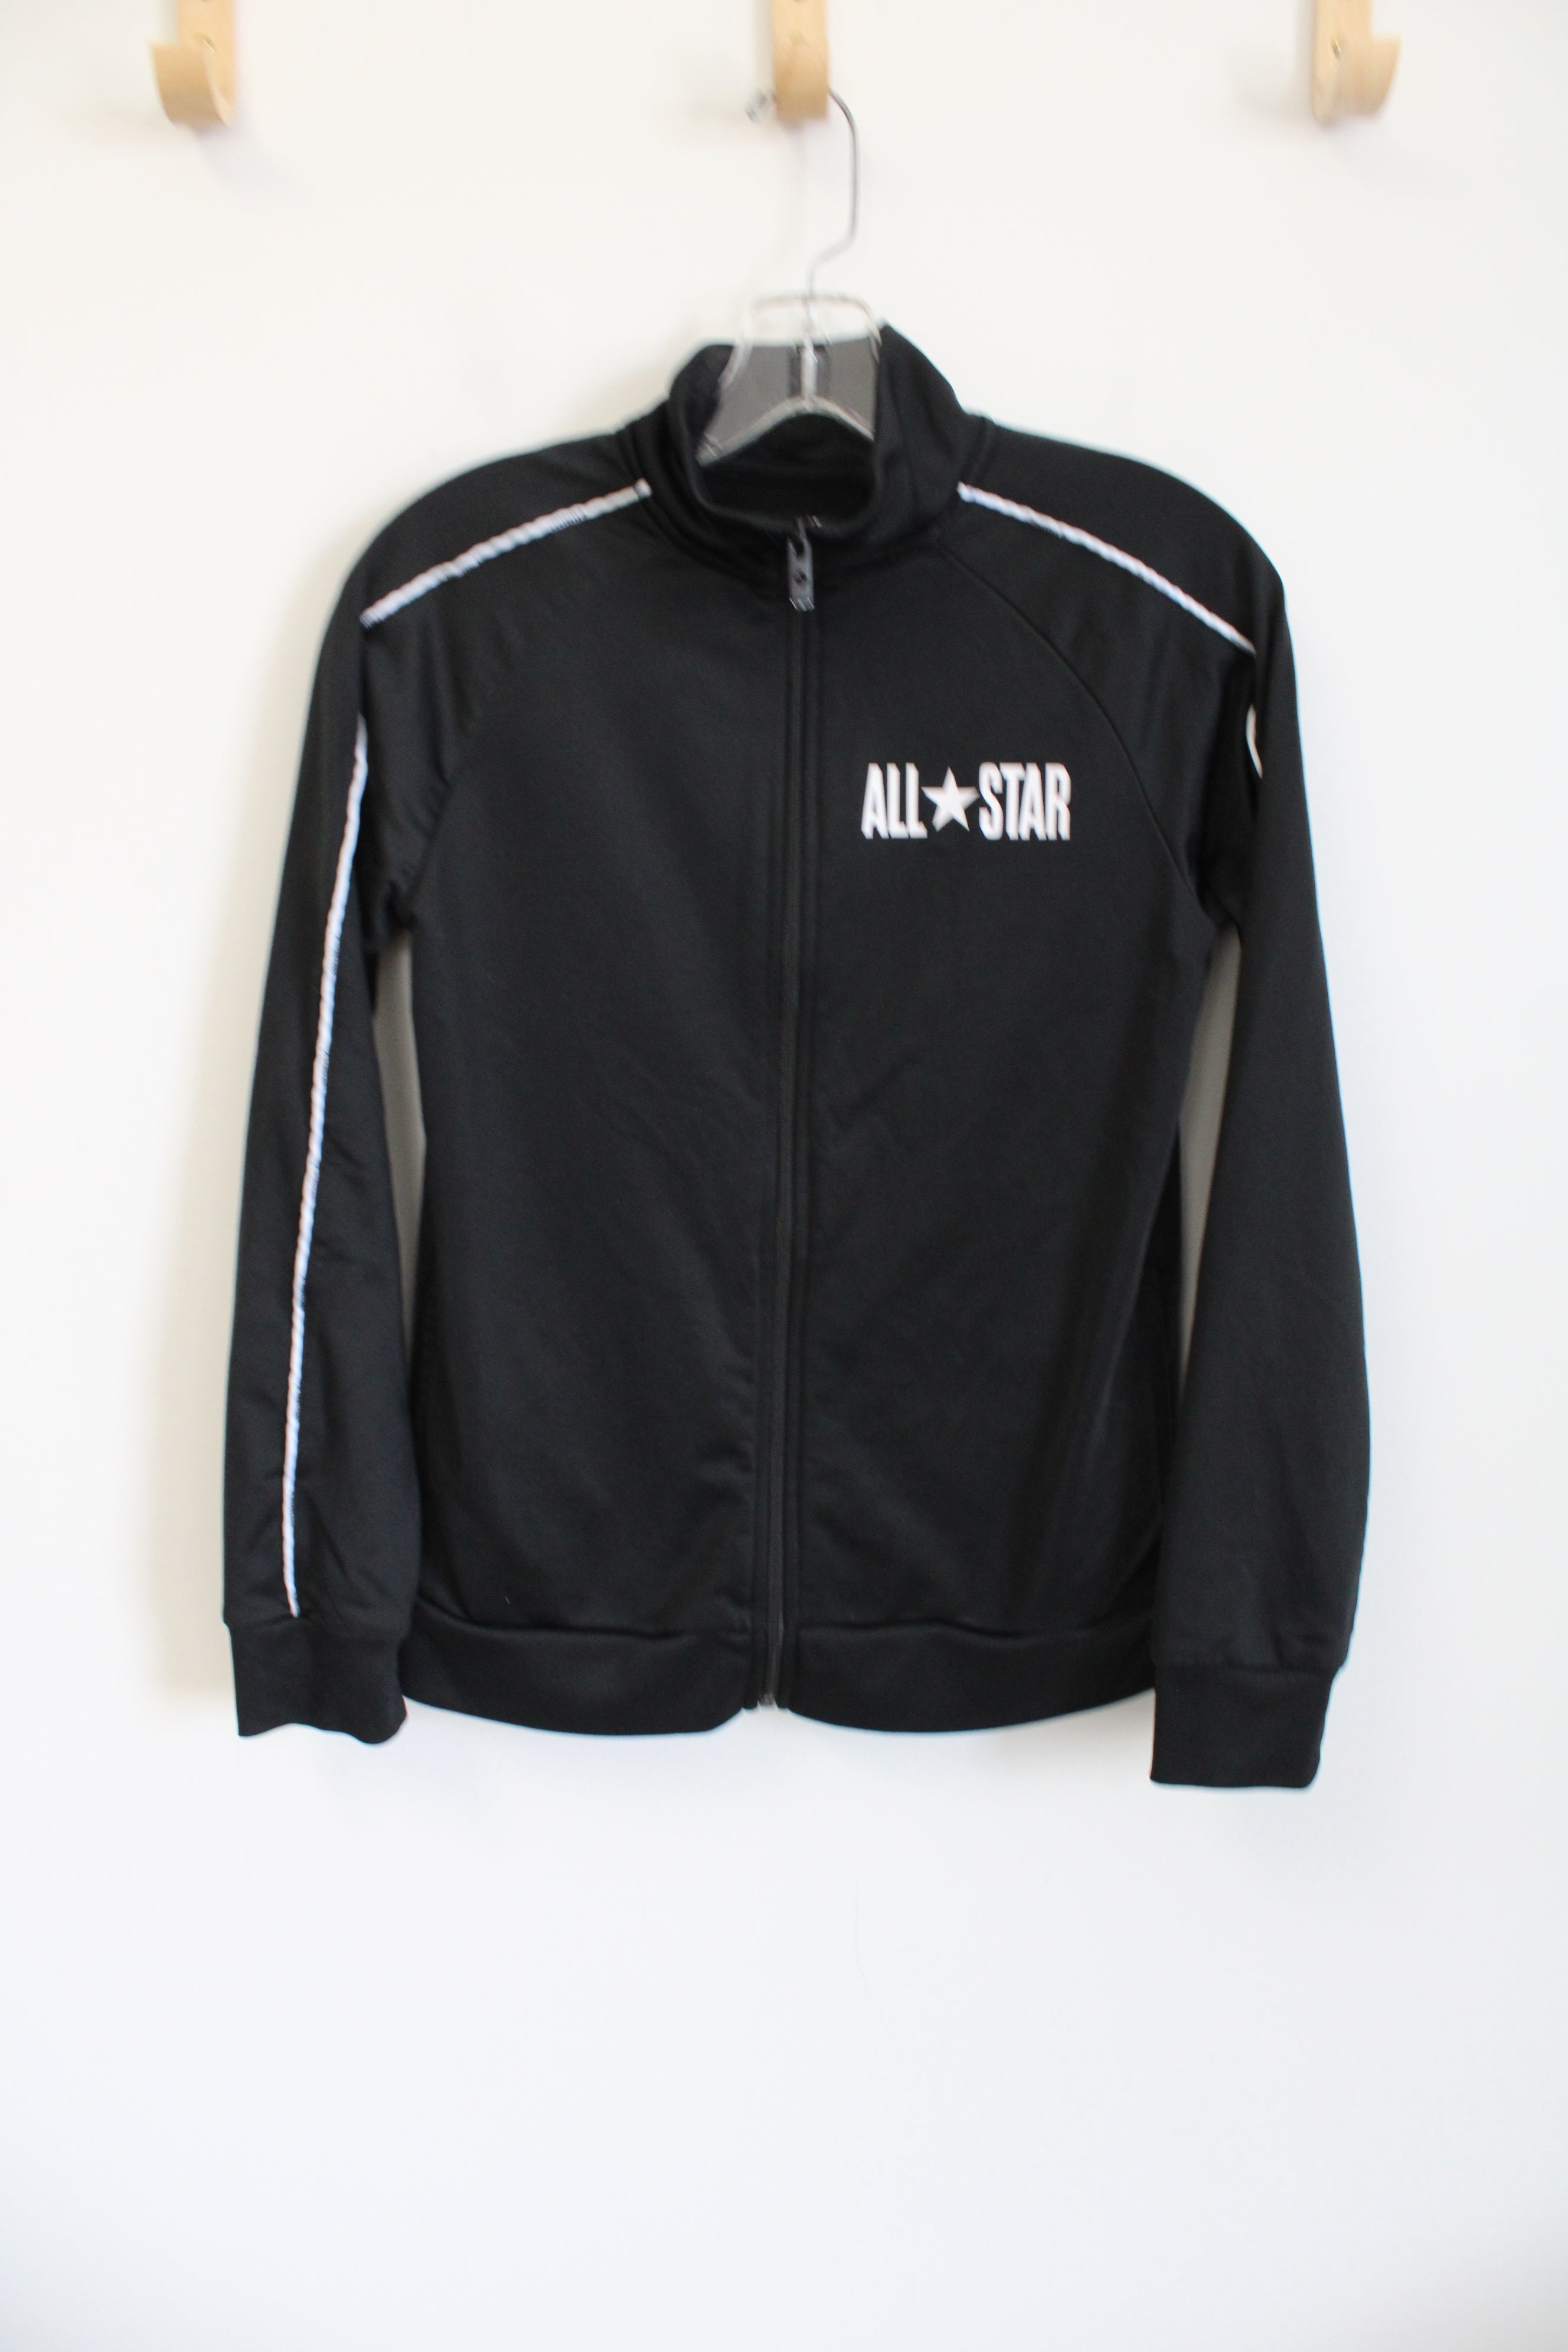 Converse All Star Black Jacket | Youth L (12/13)